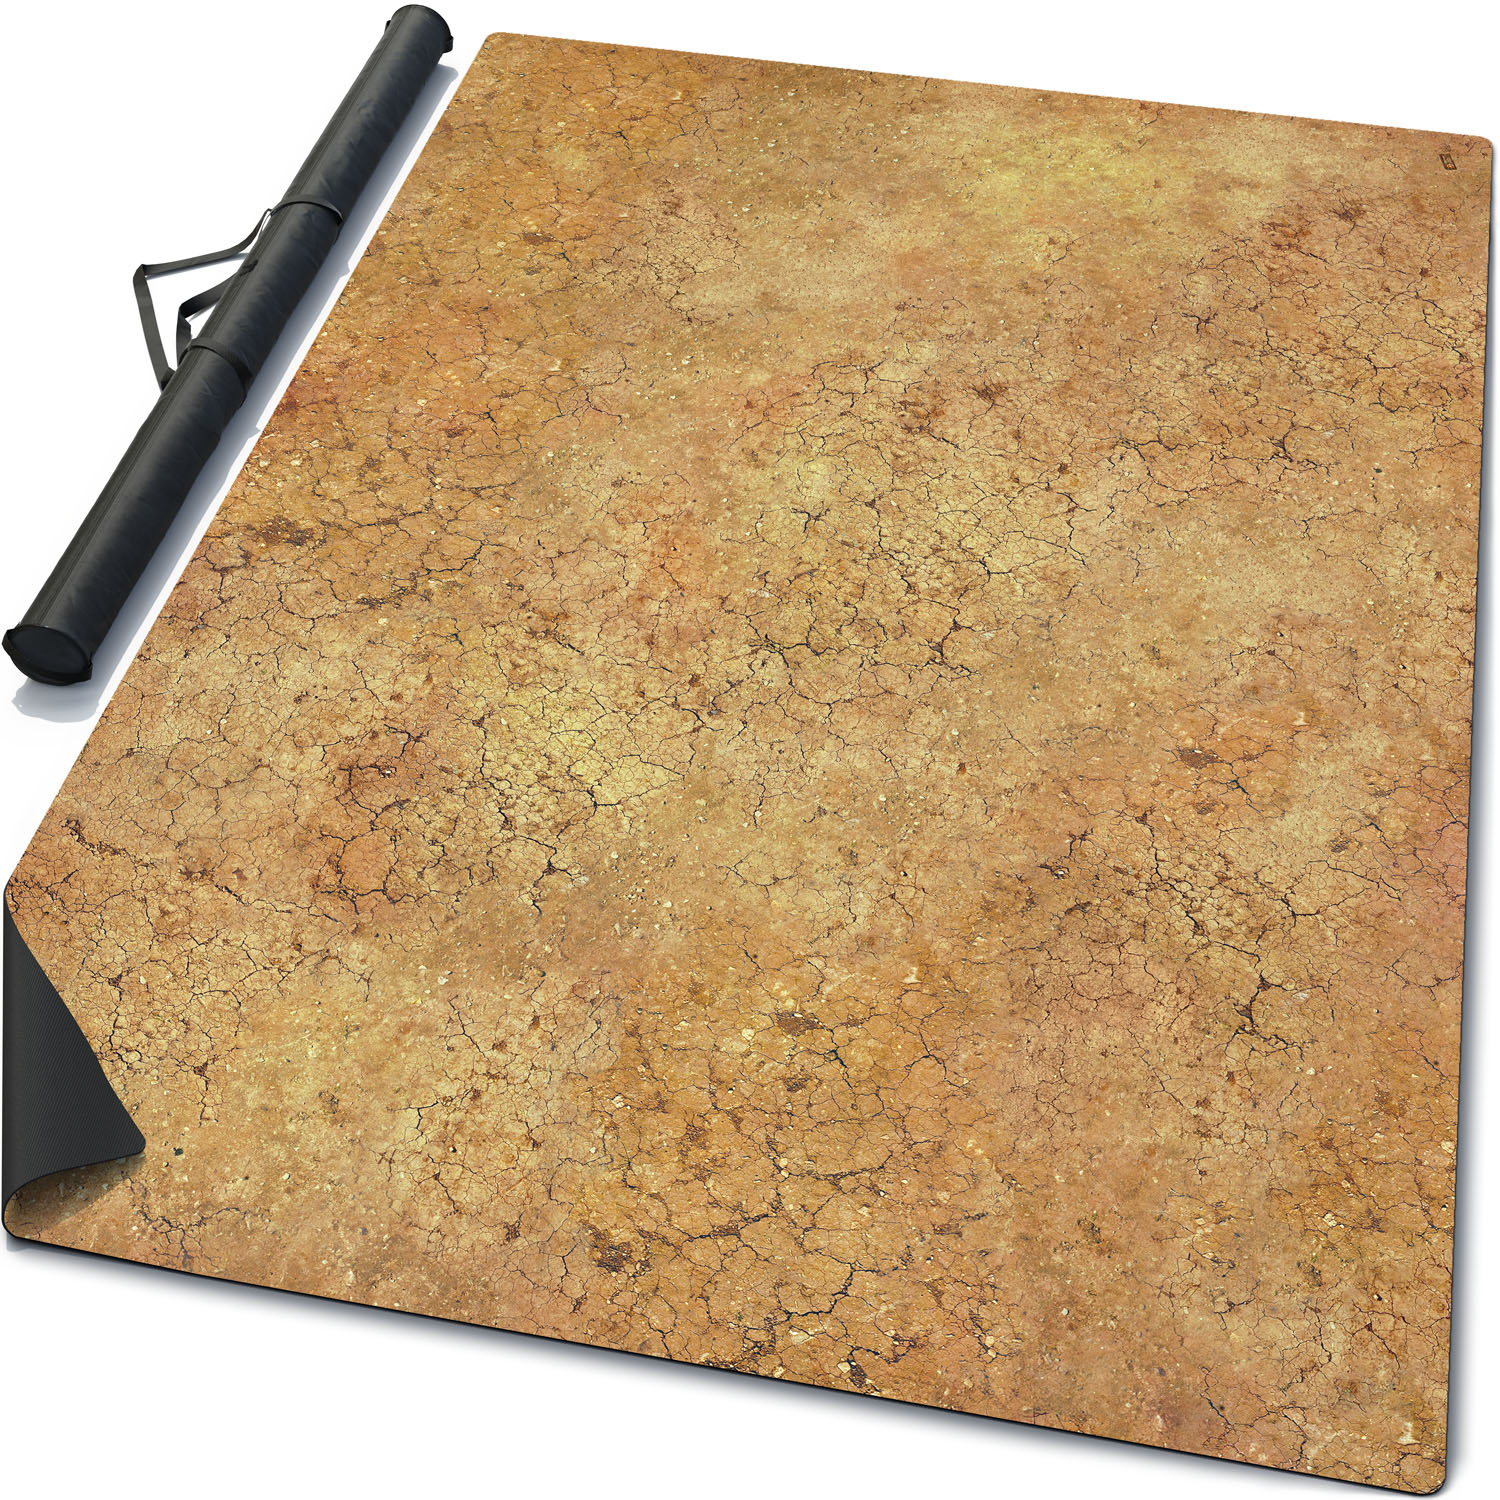 DESERT Gaming mat 72x48 for warhammer rubber mouse pad